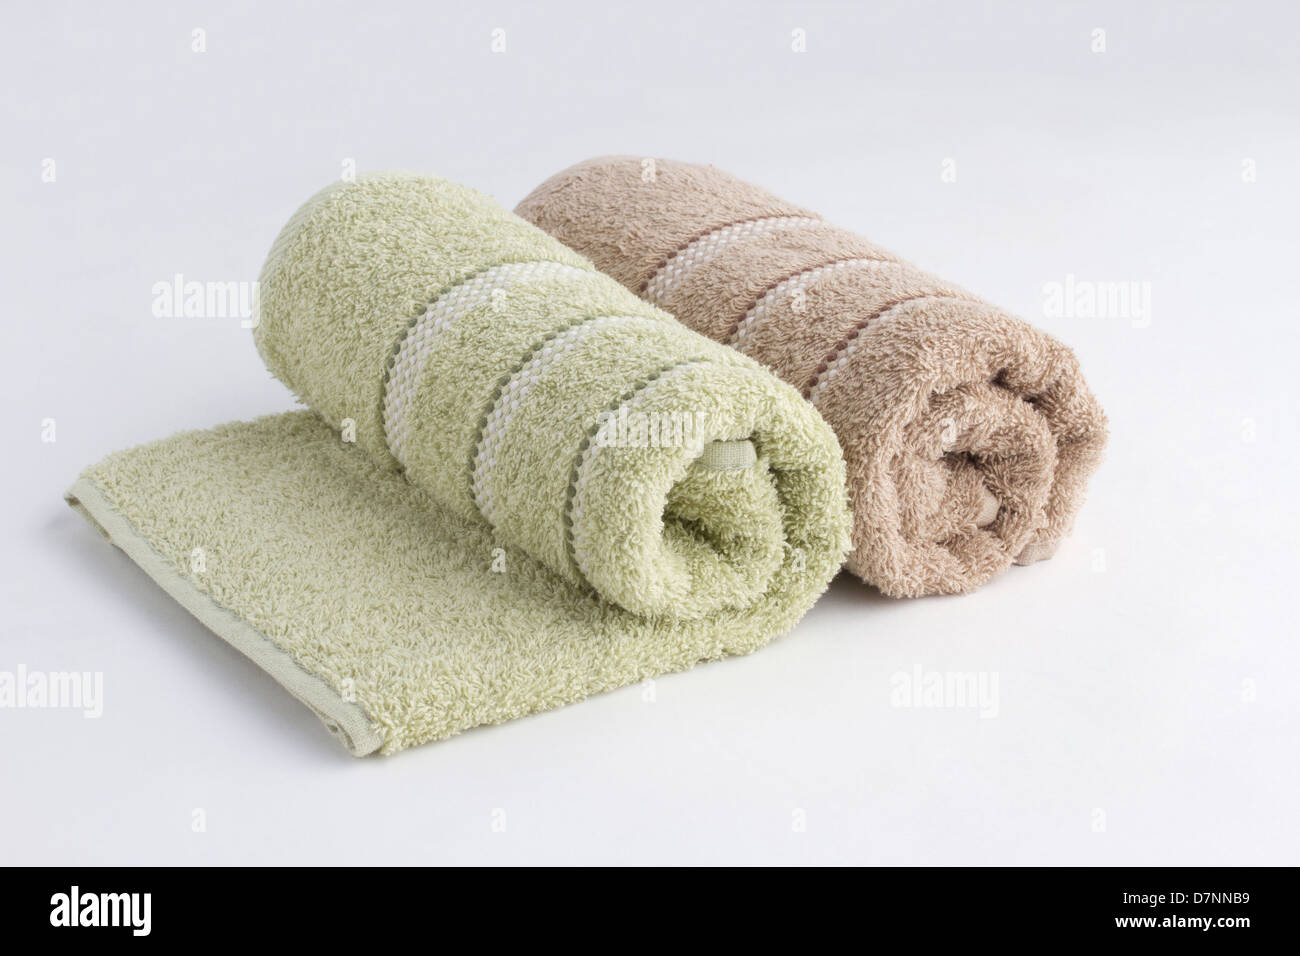 Green and brown towels rolled up on white background Stock Photo